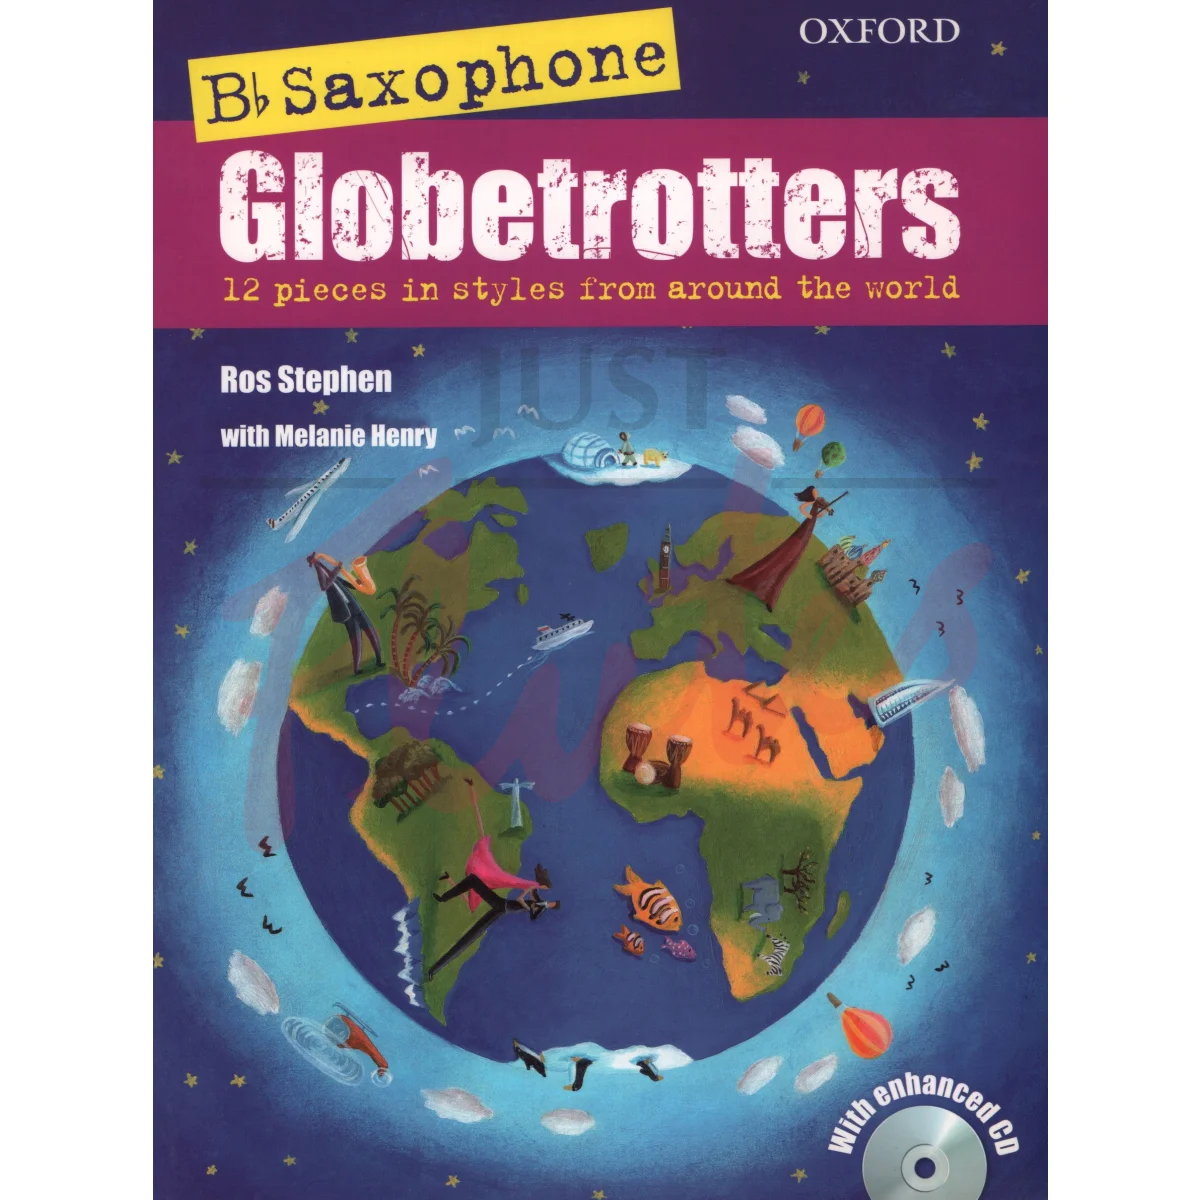 Globetrotters for Bb Saxophone